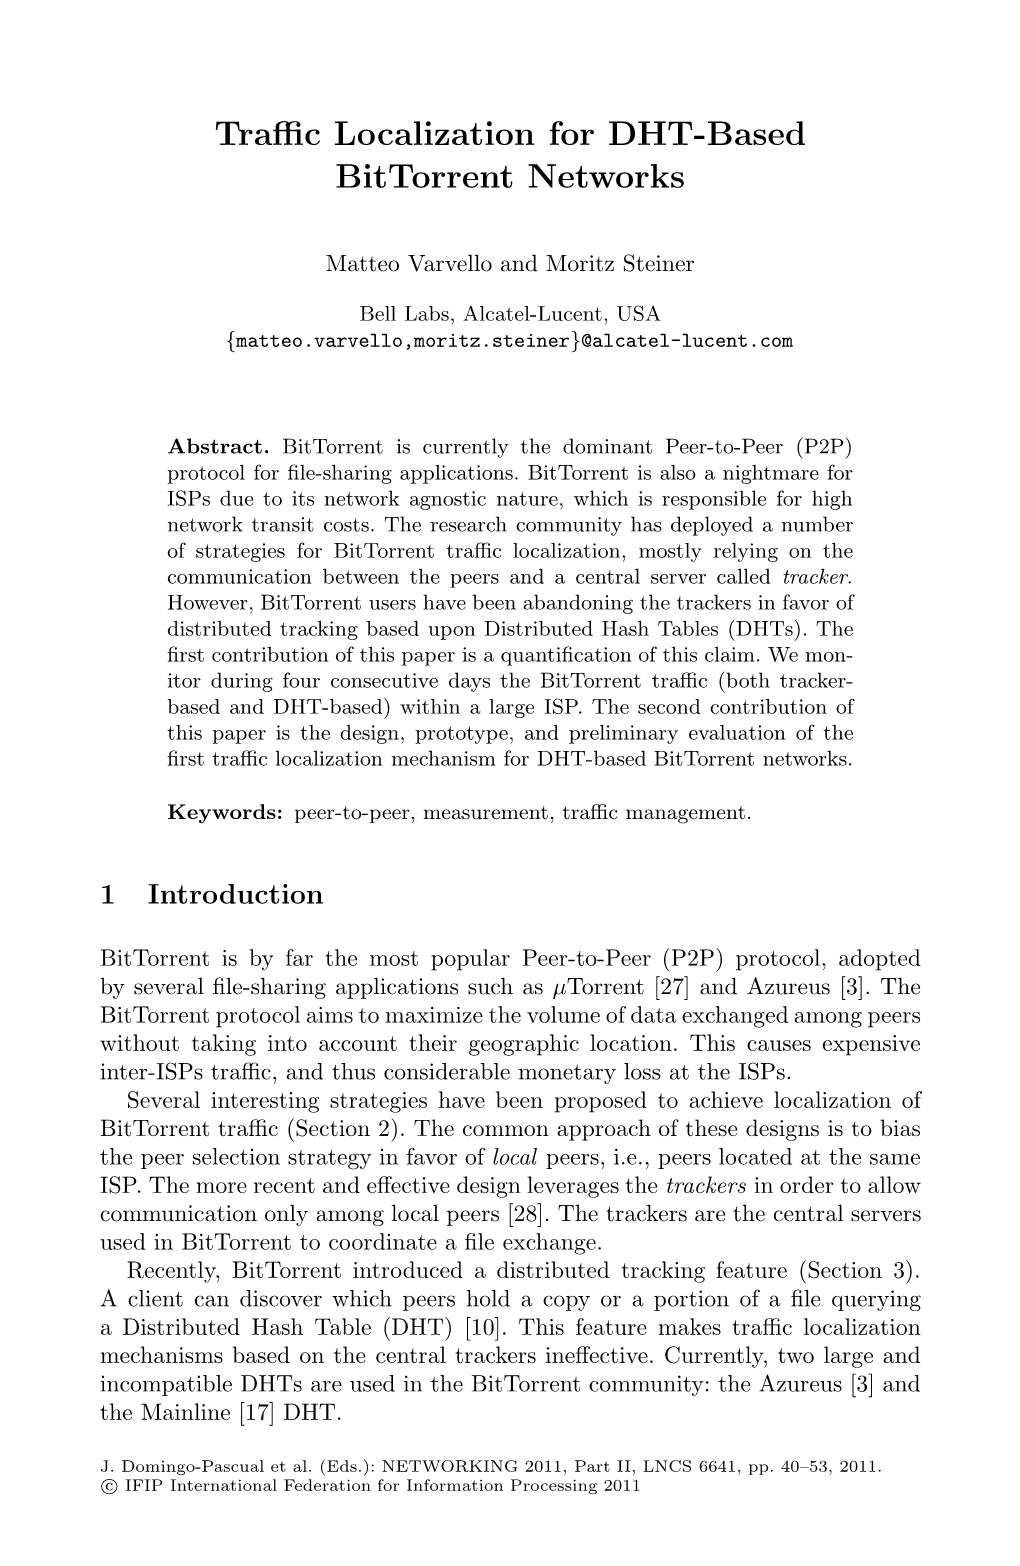 Traffic Localization for DHT-Based Bittorrent Networks